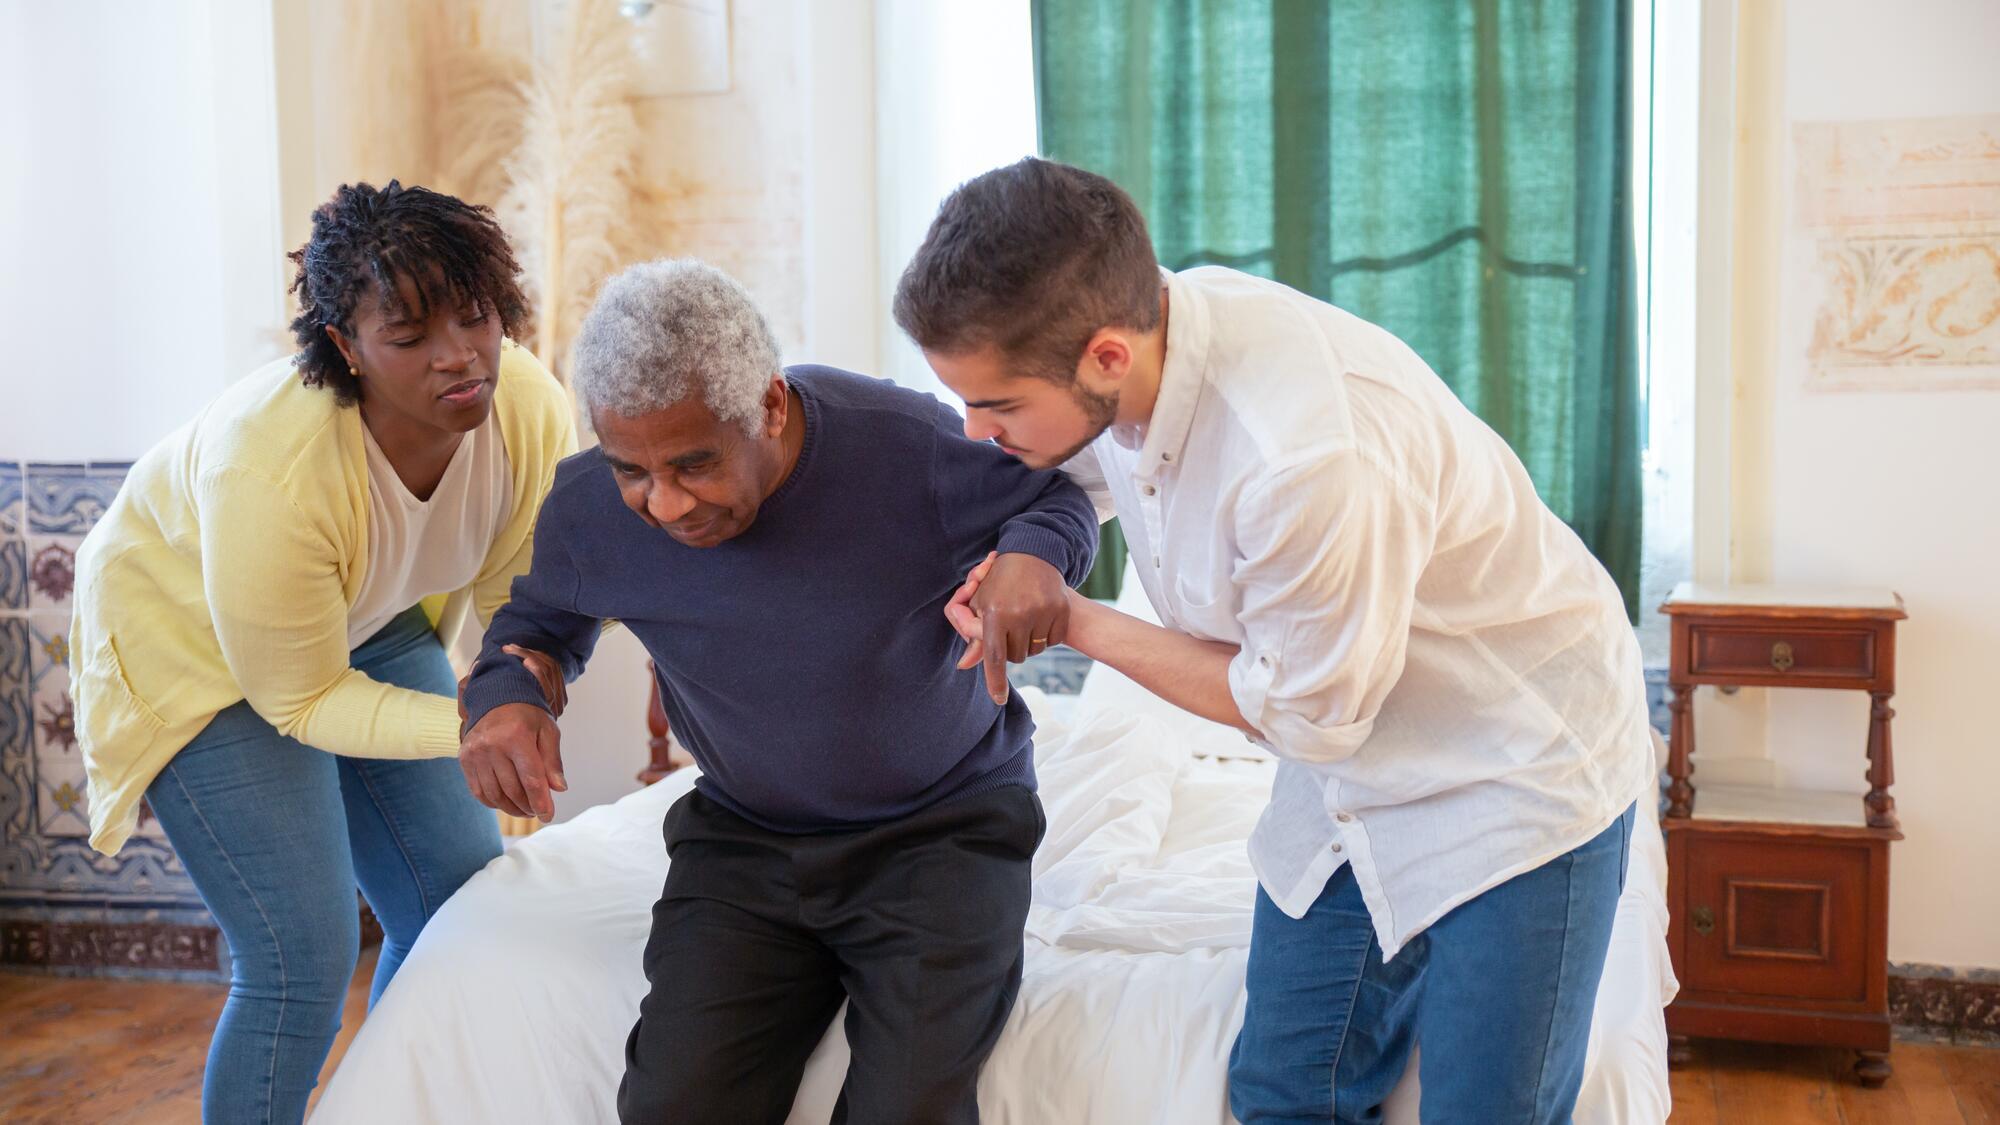 A man and woman helping an elderly man to stand up from a bed